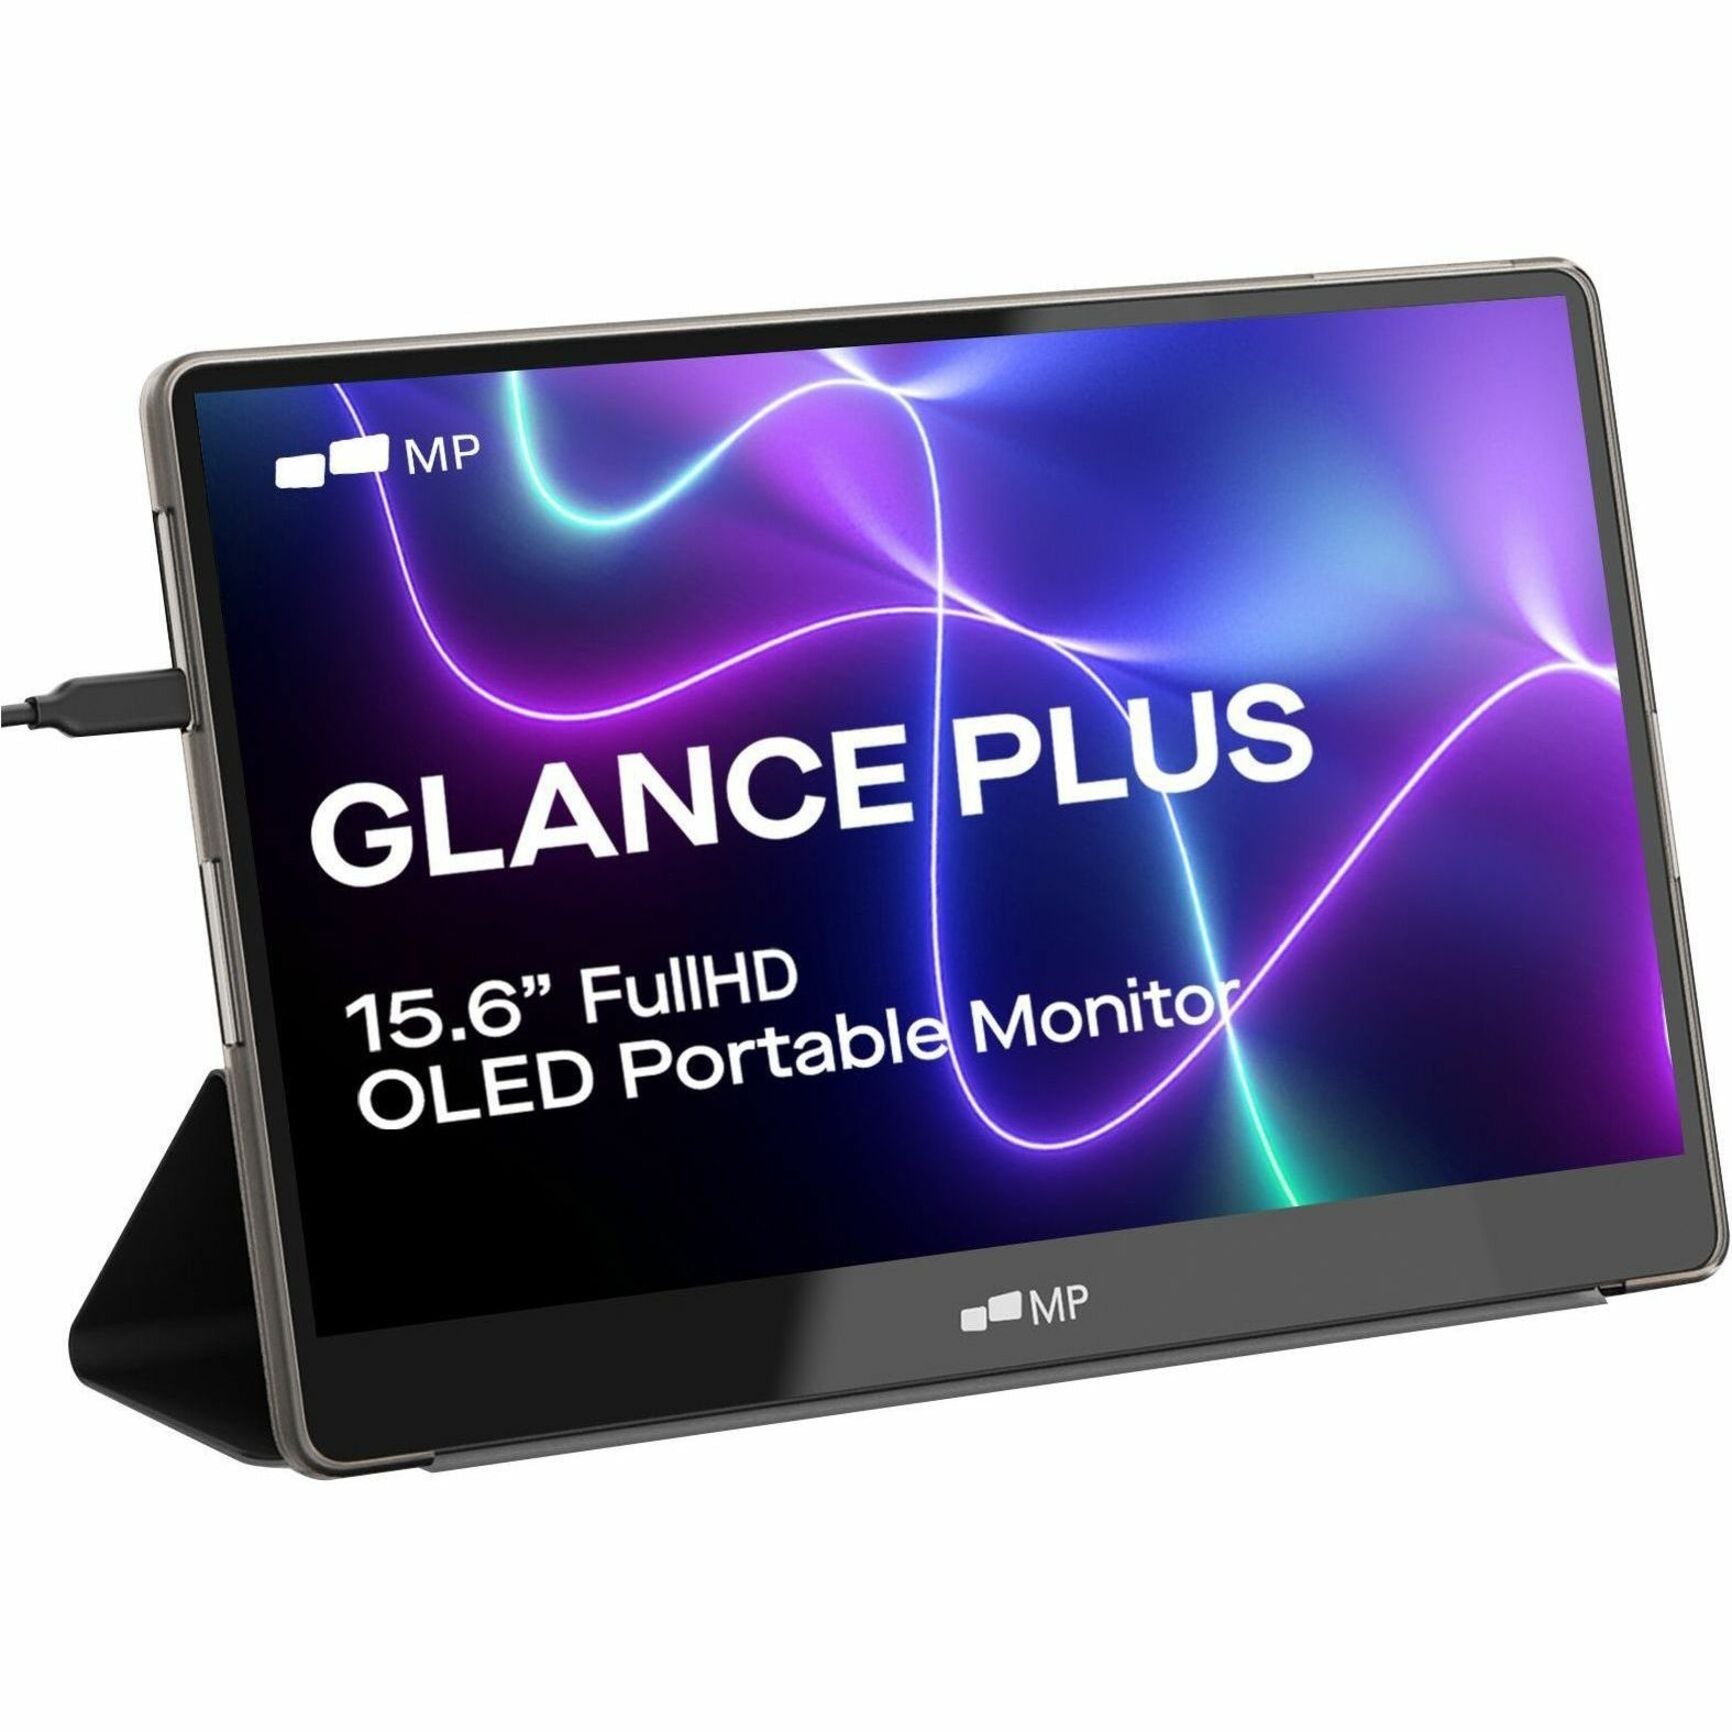 Mobile Pixels 101-1012P01 Glance Plus OLED Monitor, Full HD, 16:9, 16 Viewable Screen Size, 400 Nit Brightness, 100% DCI-P3 Color Gamut